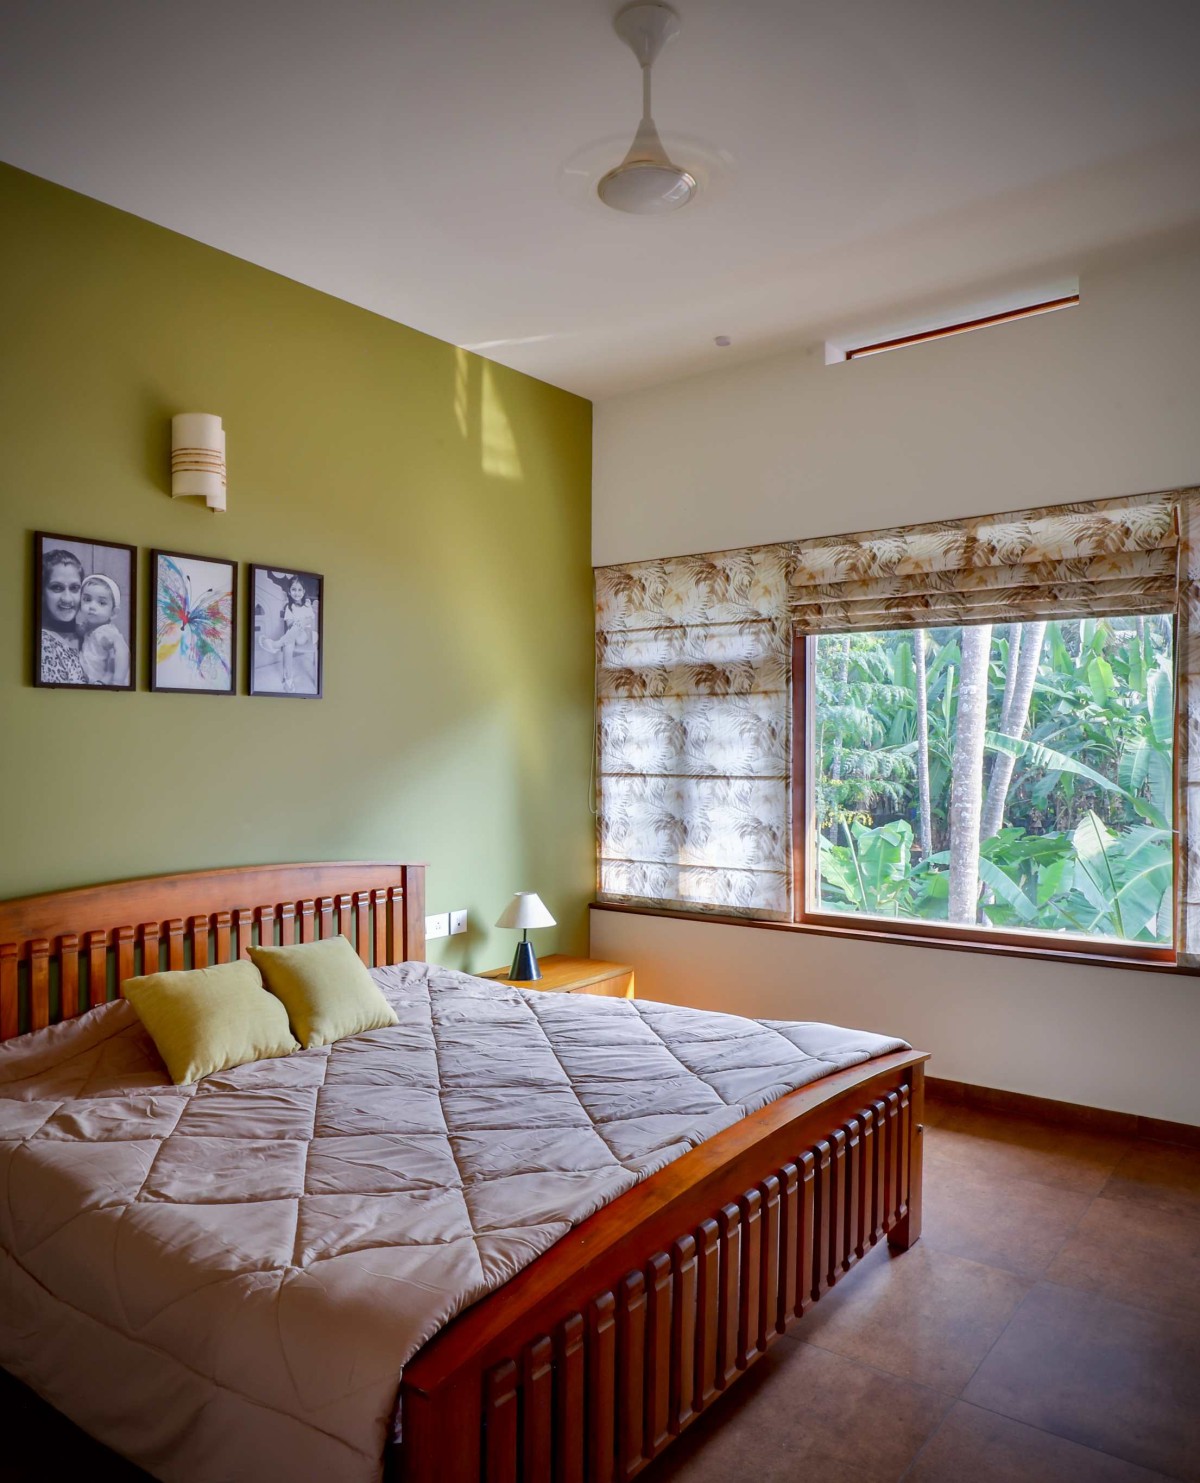 Bedroom 2 of Our Space by Satkriya Architecture